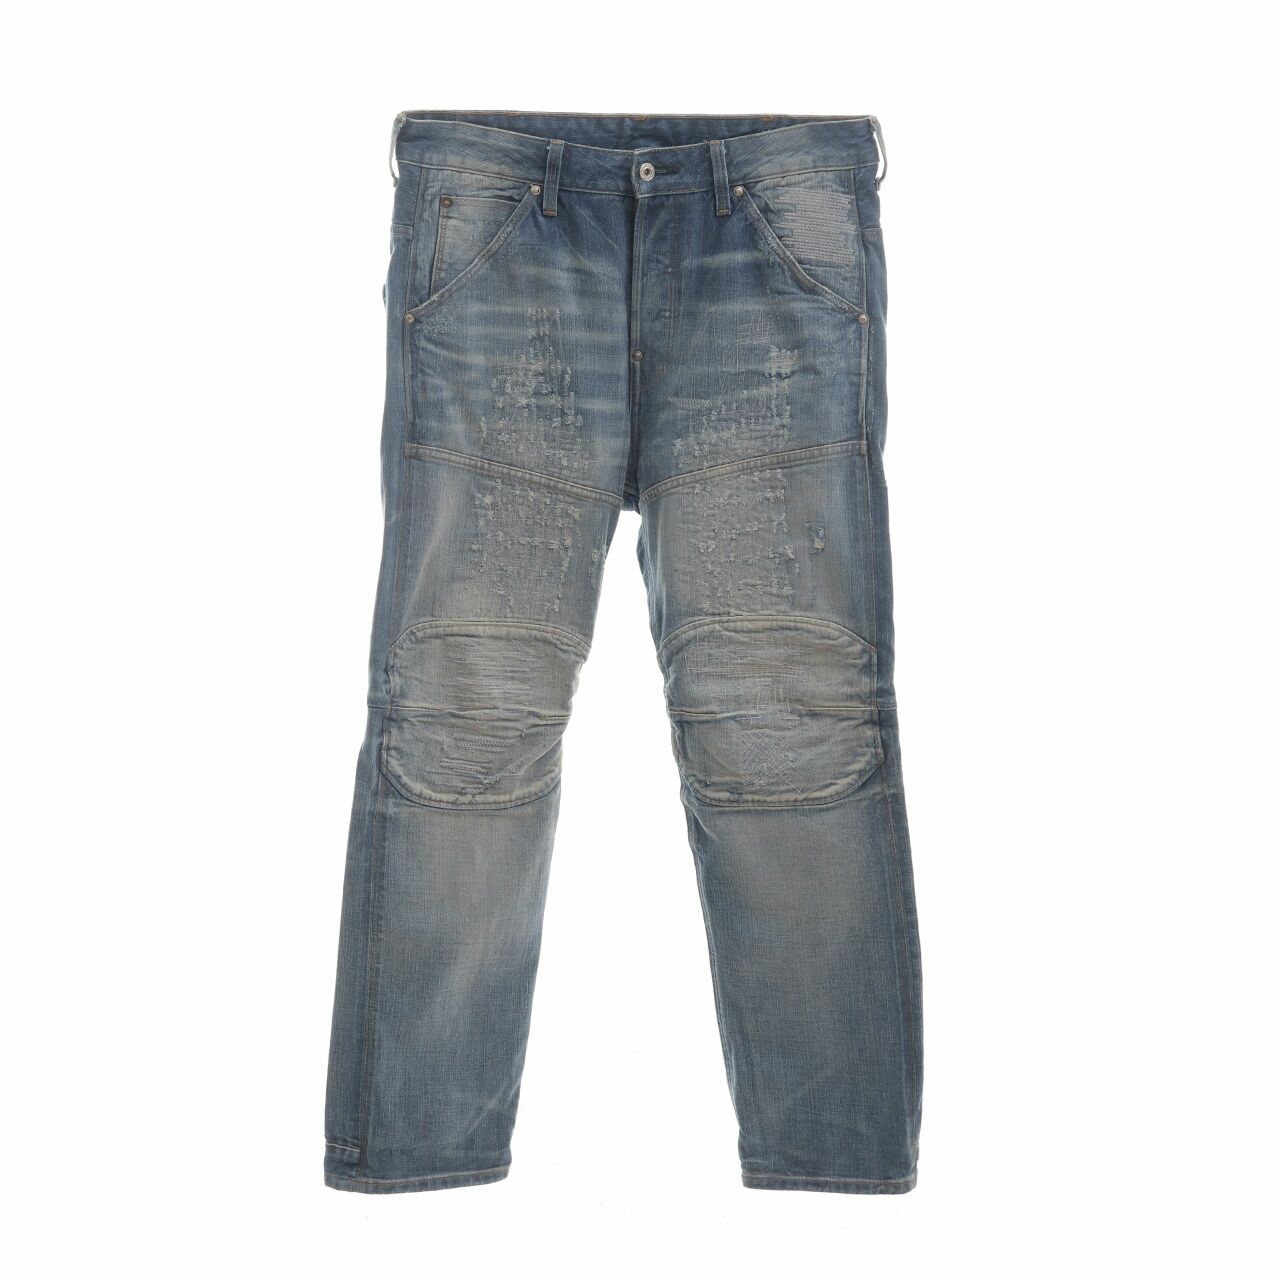 G Star Raw Blue Washed Denim Ripped Long Pants